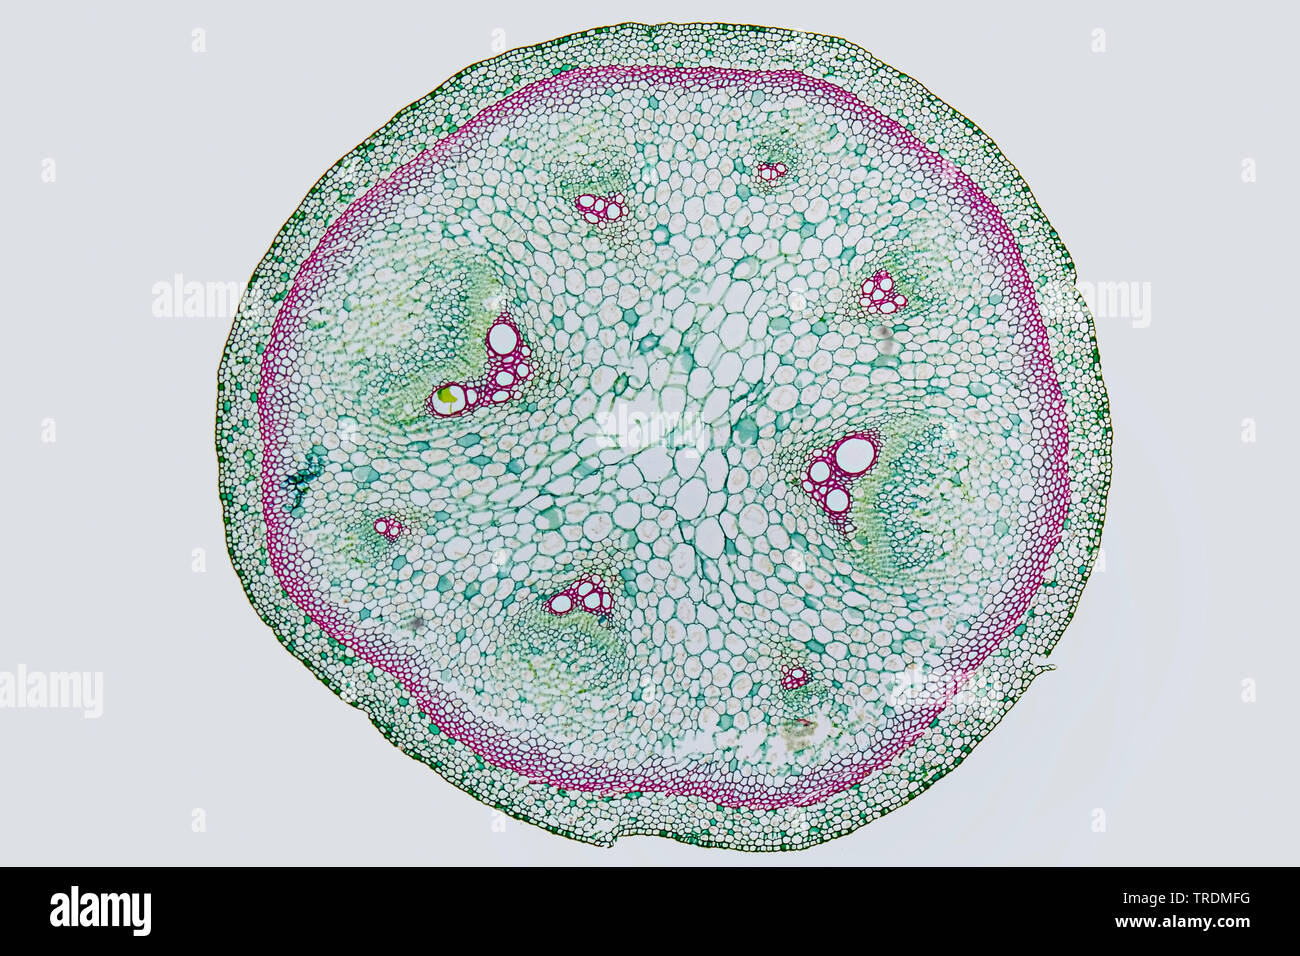 dutchman's pipe, pipe vine (Aristolochia macrophylla, Aristolochia sipho), cross section of a one-year old sprout, x 12 Stock Photo